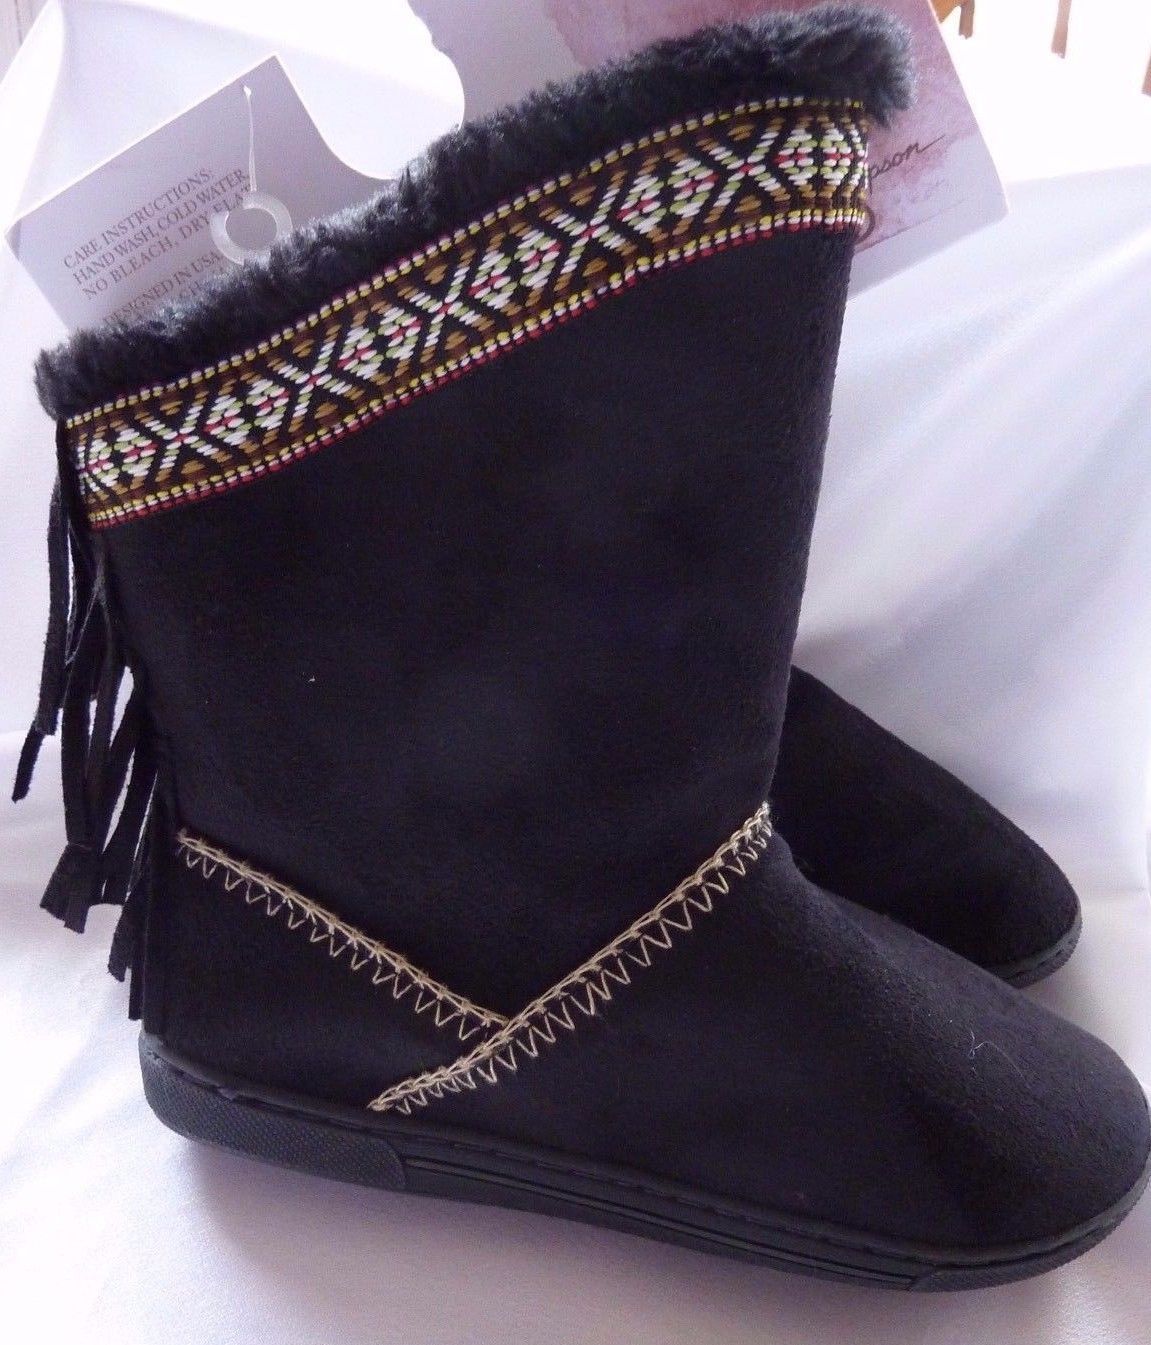 Primary image for Jessica Simpson Boots Shoes BLACK Size S (5-6) Fringe Hippie Country Western NEW